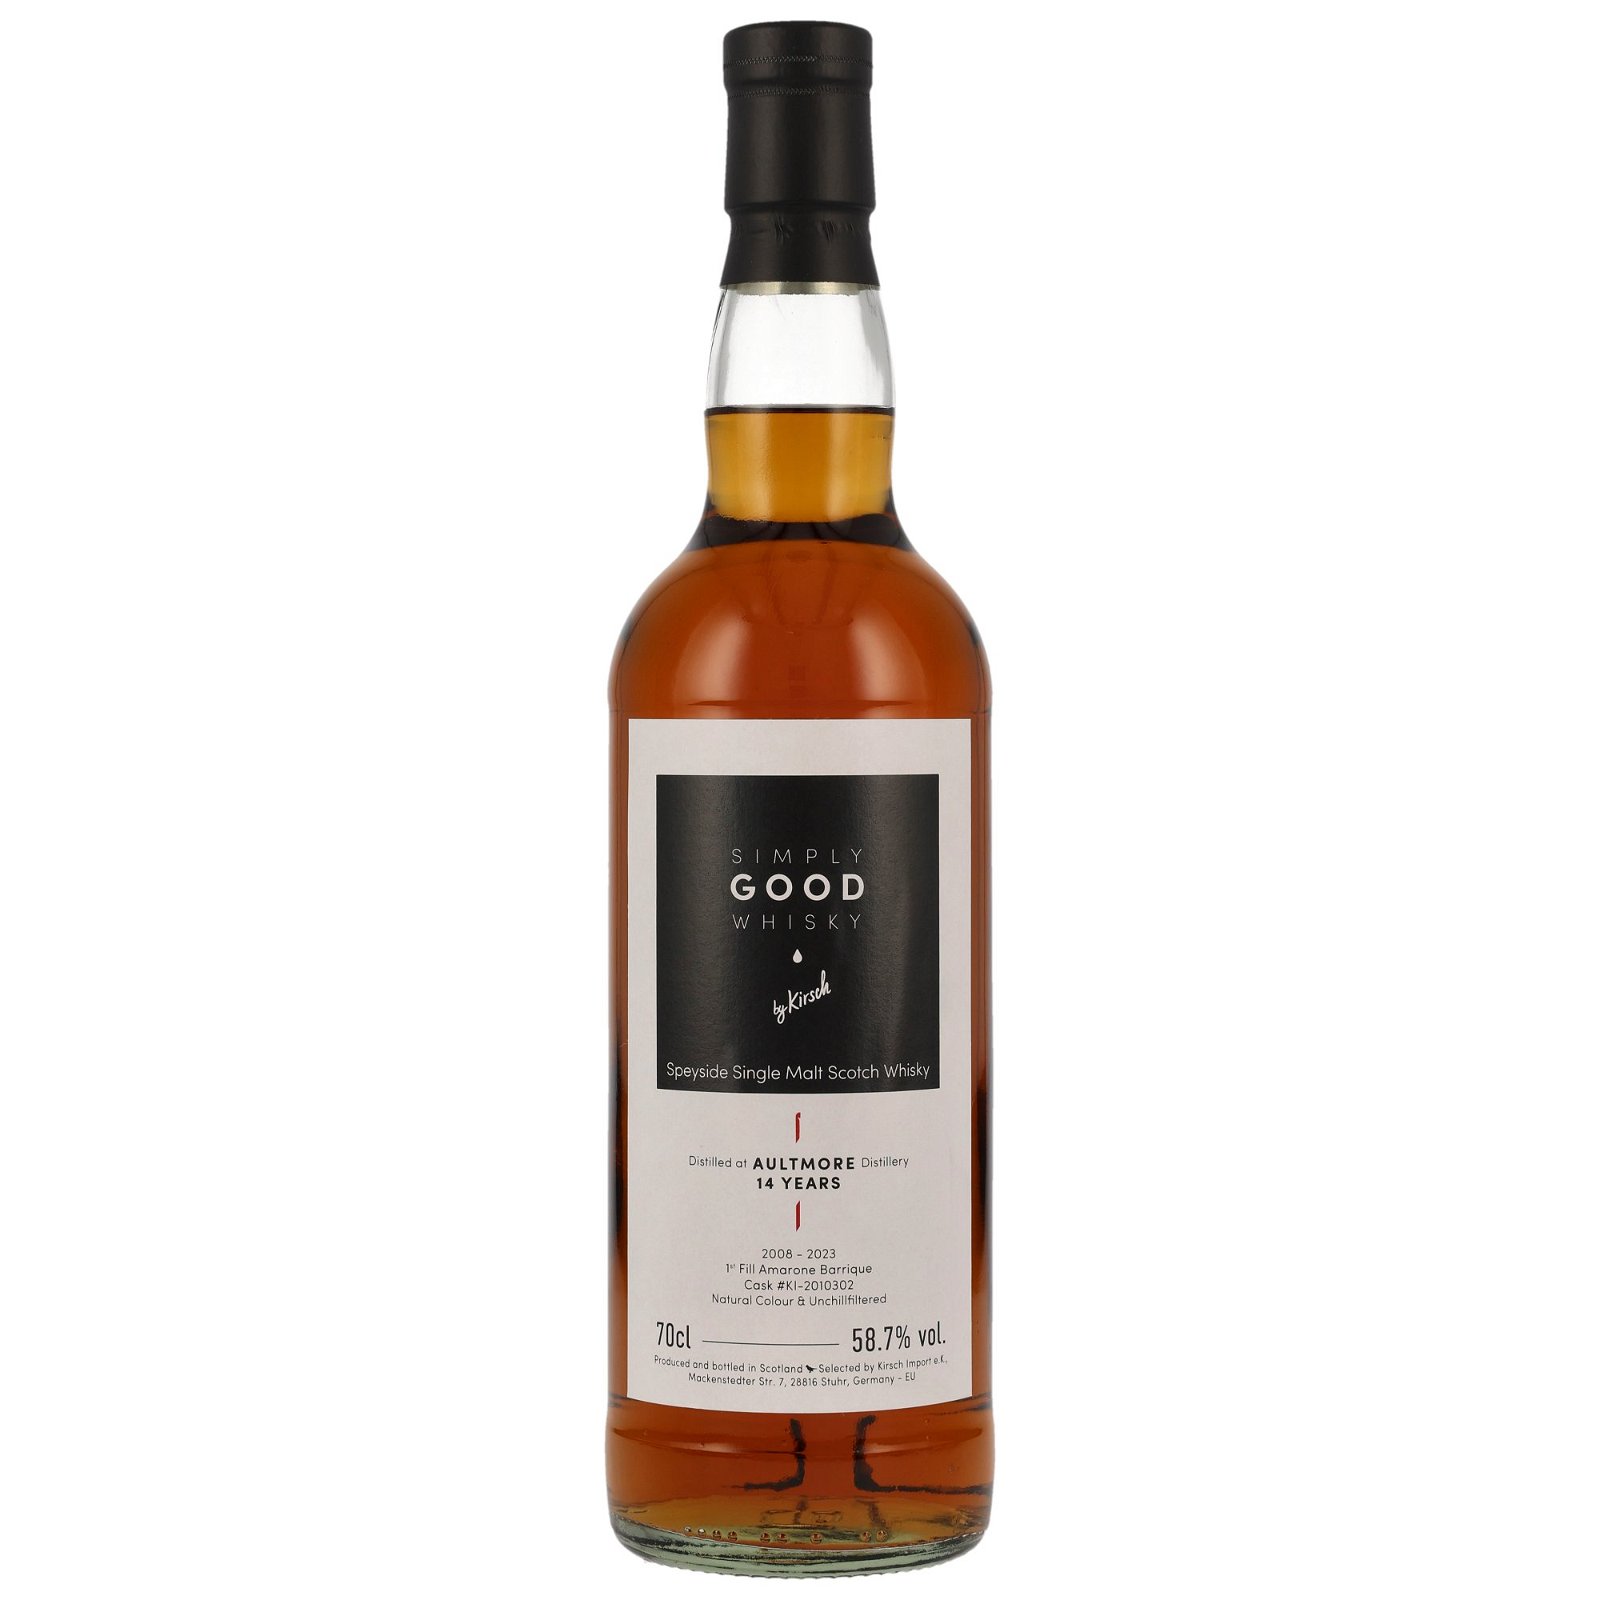 Aultmore 2008/2023 - 14 Jahre 1st Fill Amarone Barrique No. KI-2010302 (Simply Good Whisky)